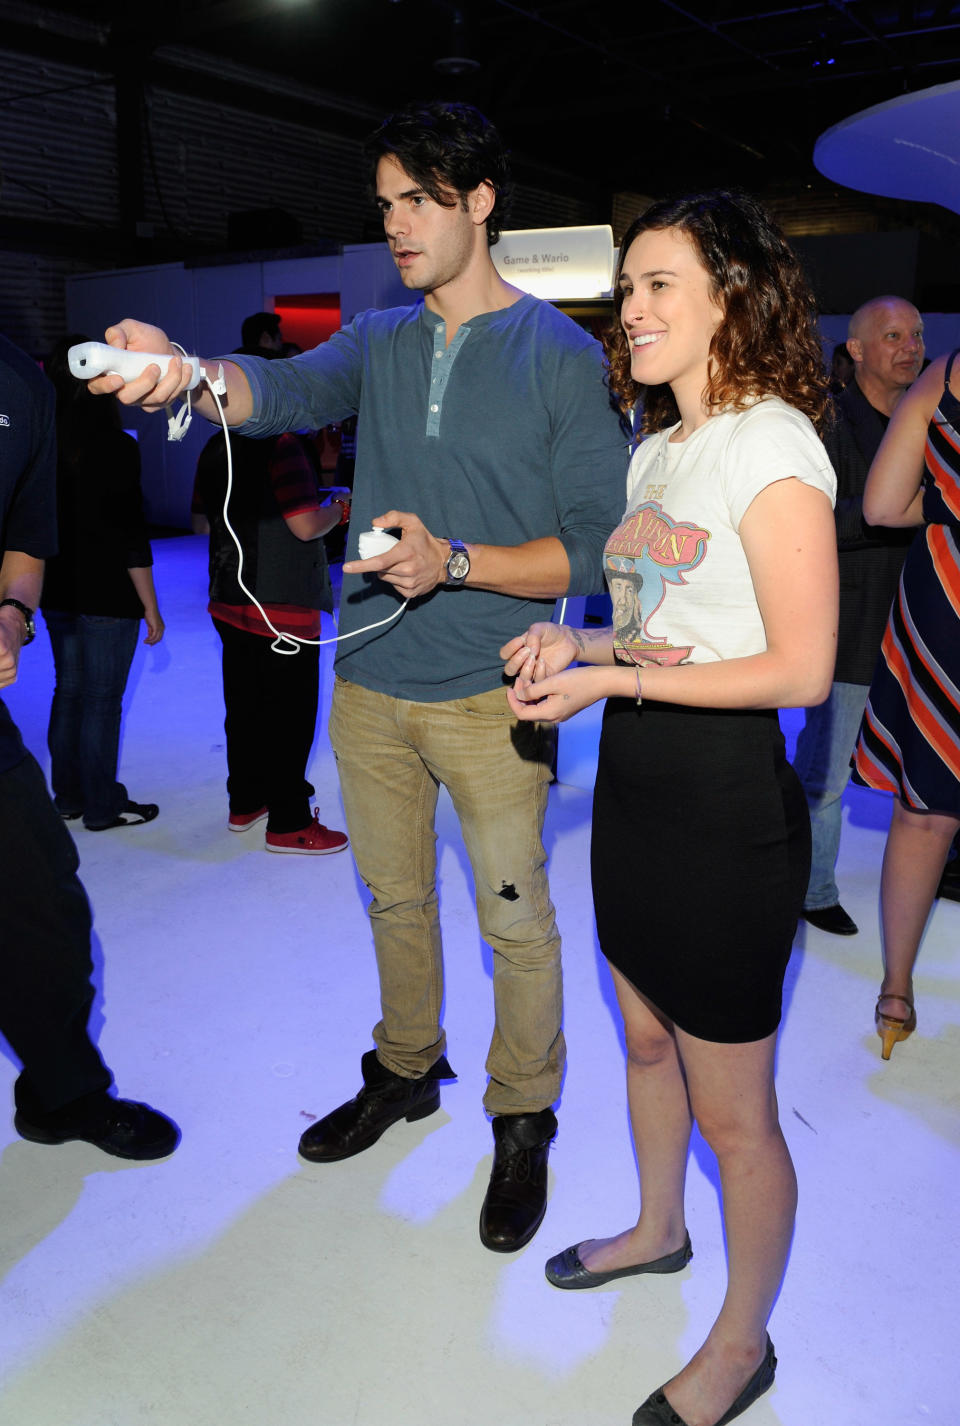 LOS ANGELES, CA - SEPTEMBER 20: Jayson Blair and Rumer Willis attend the Nintendo Hosts Wii U Experience In Los Angeles on September 20, 2012 in Los Angeles, California. (Photo by Amy Graves/Getty Images for Nintendo)